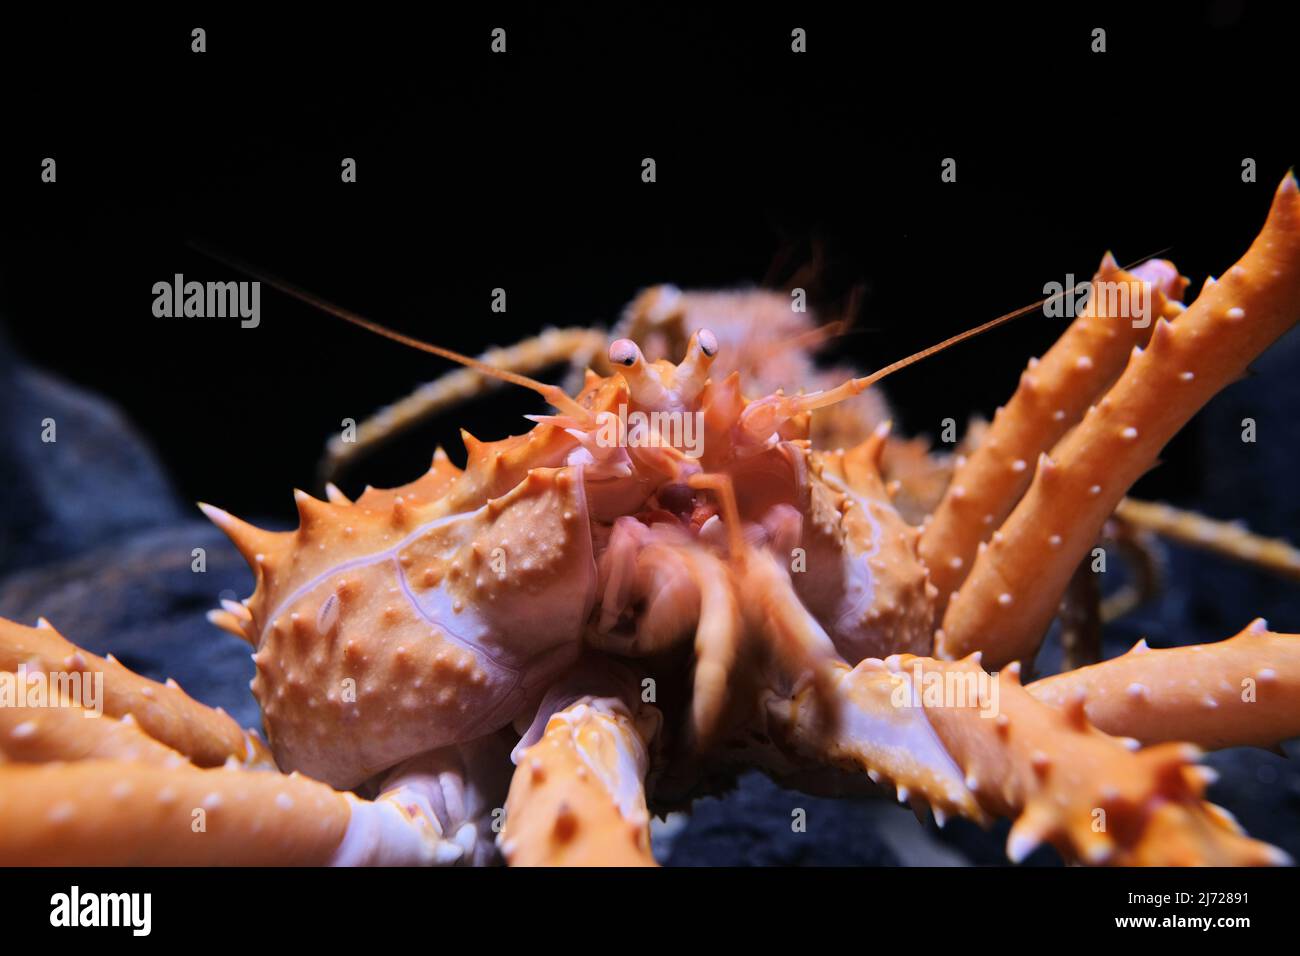 Spiny king crab, Paralithodes rathbuni, close-up details; descendent of the hermit crab. Stock Photo